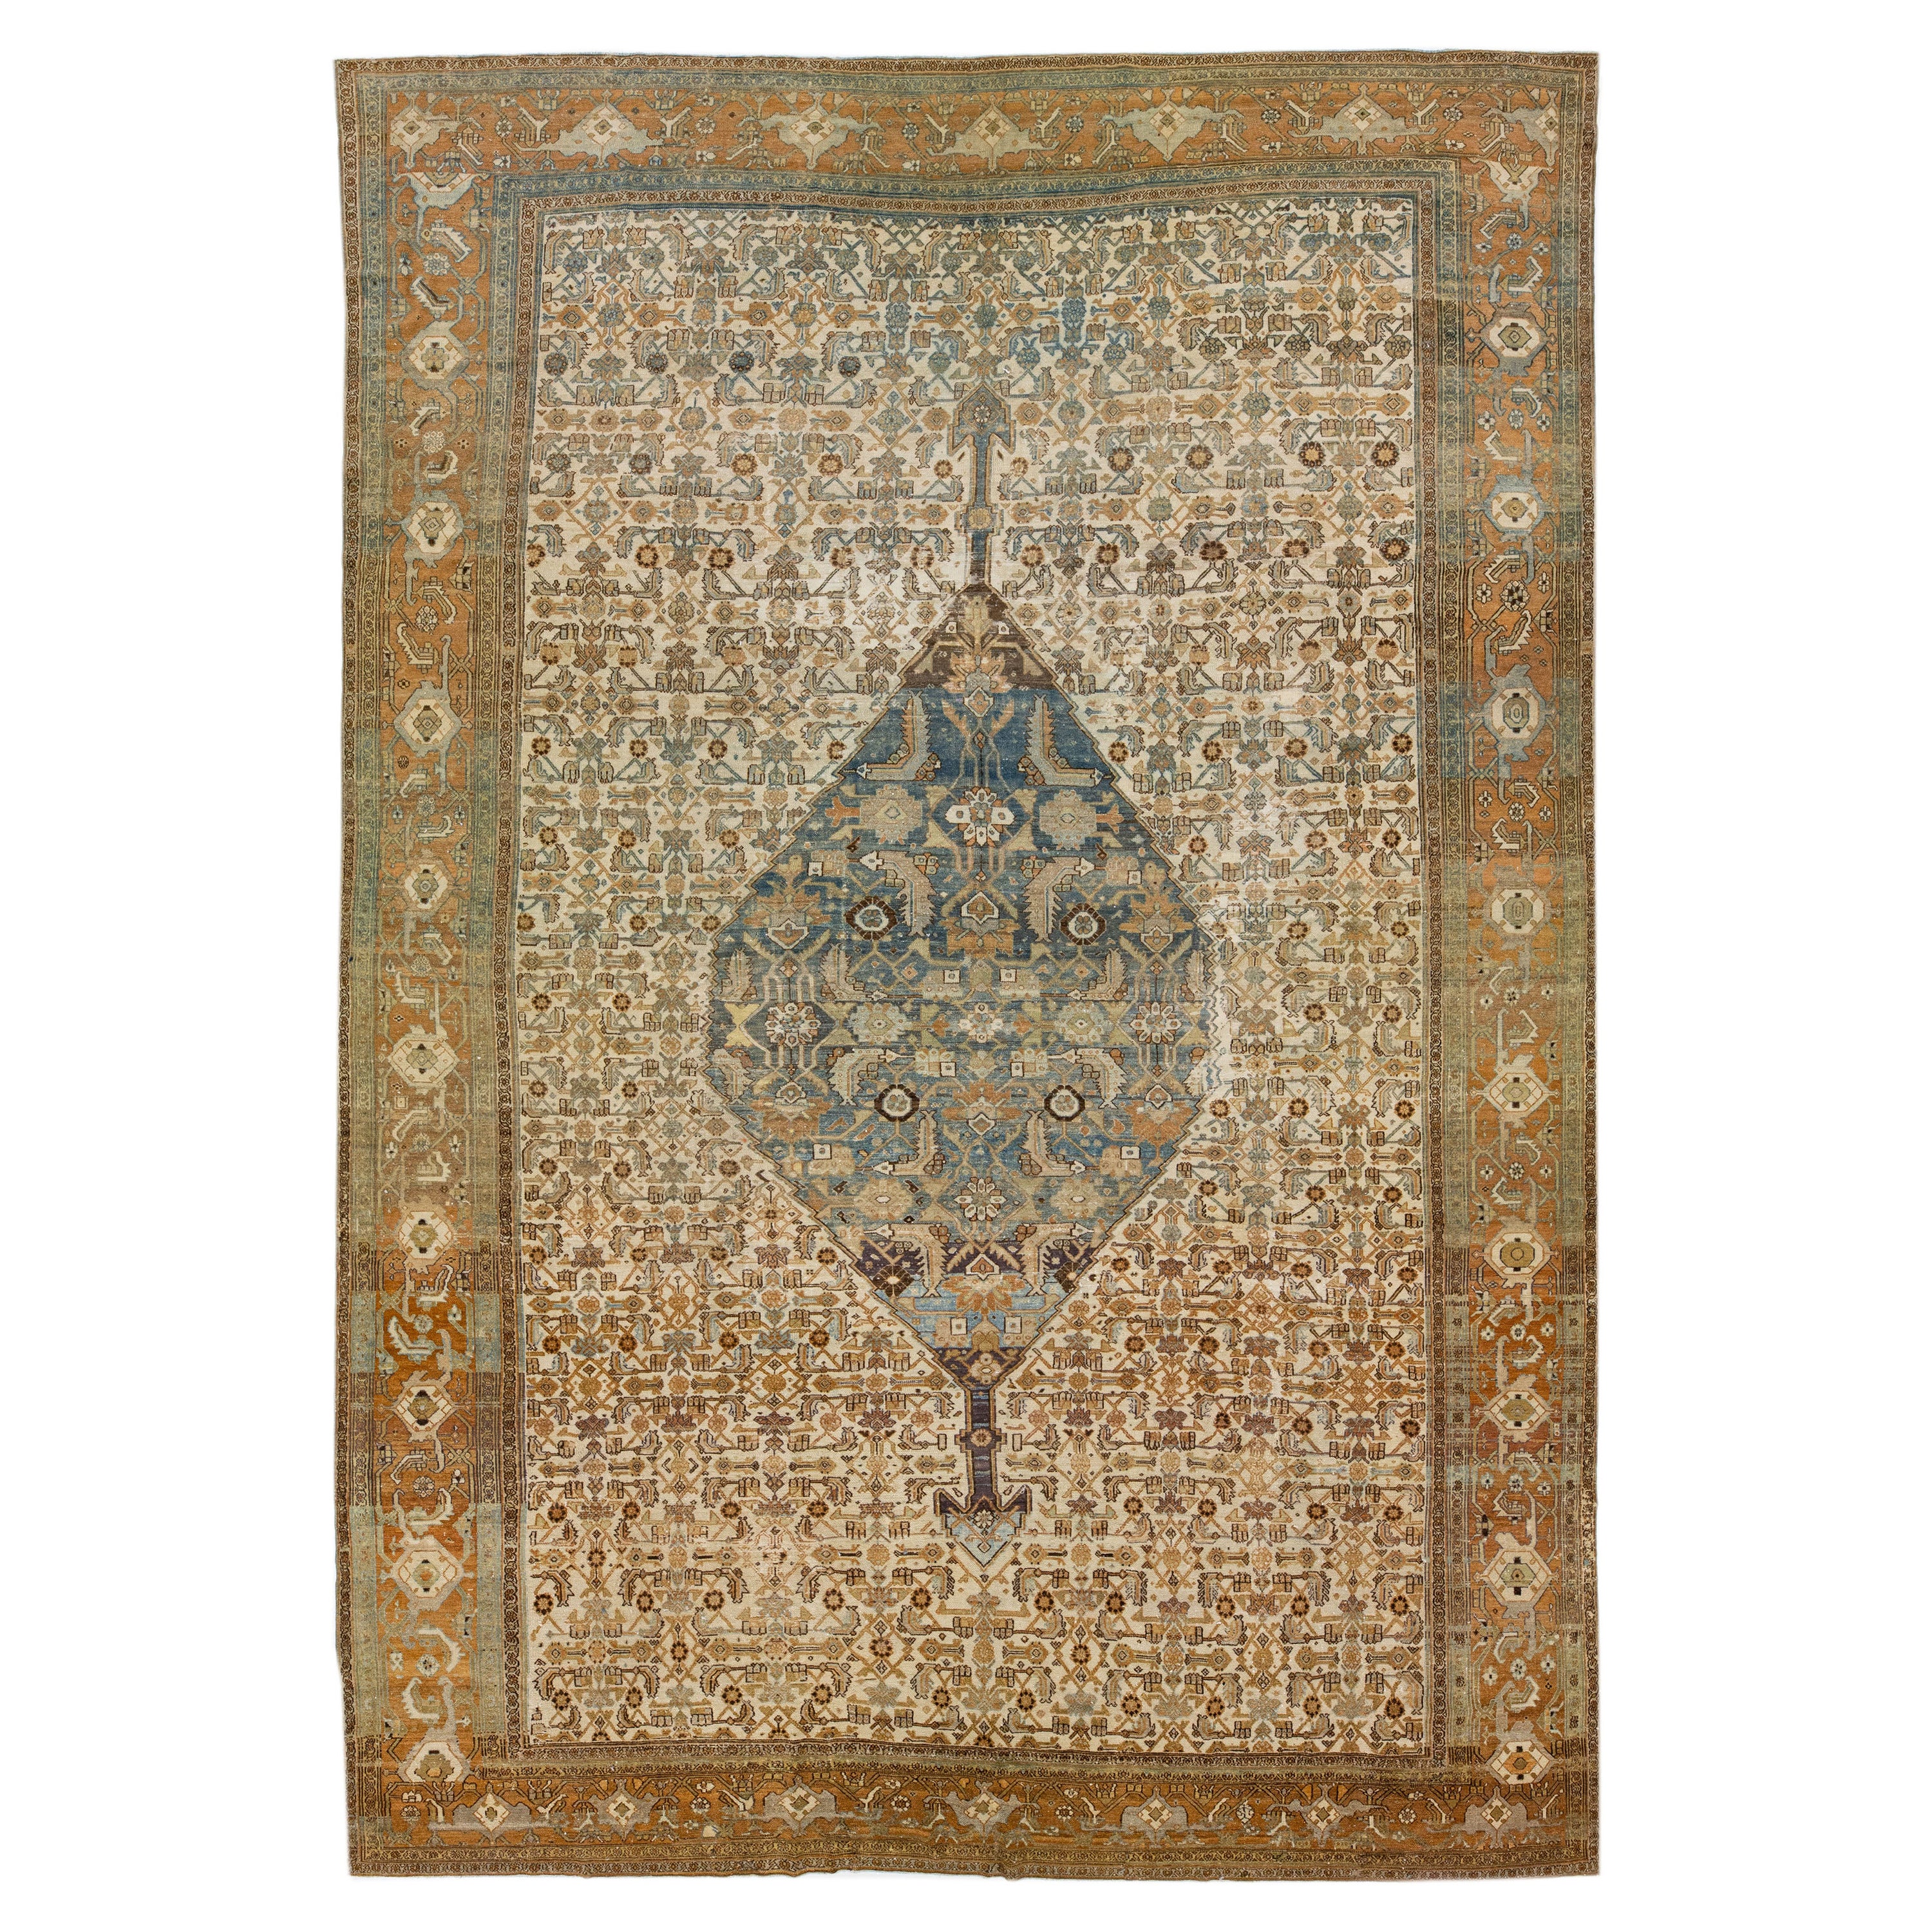 Allover Handmade 1900s Persian Malayer Wool Rug In Beige